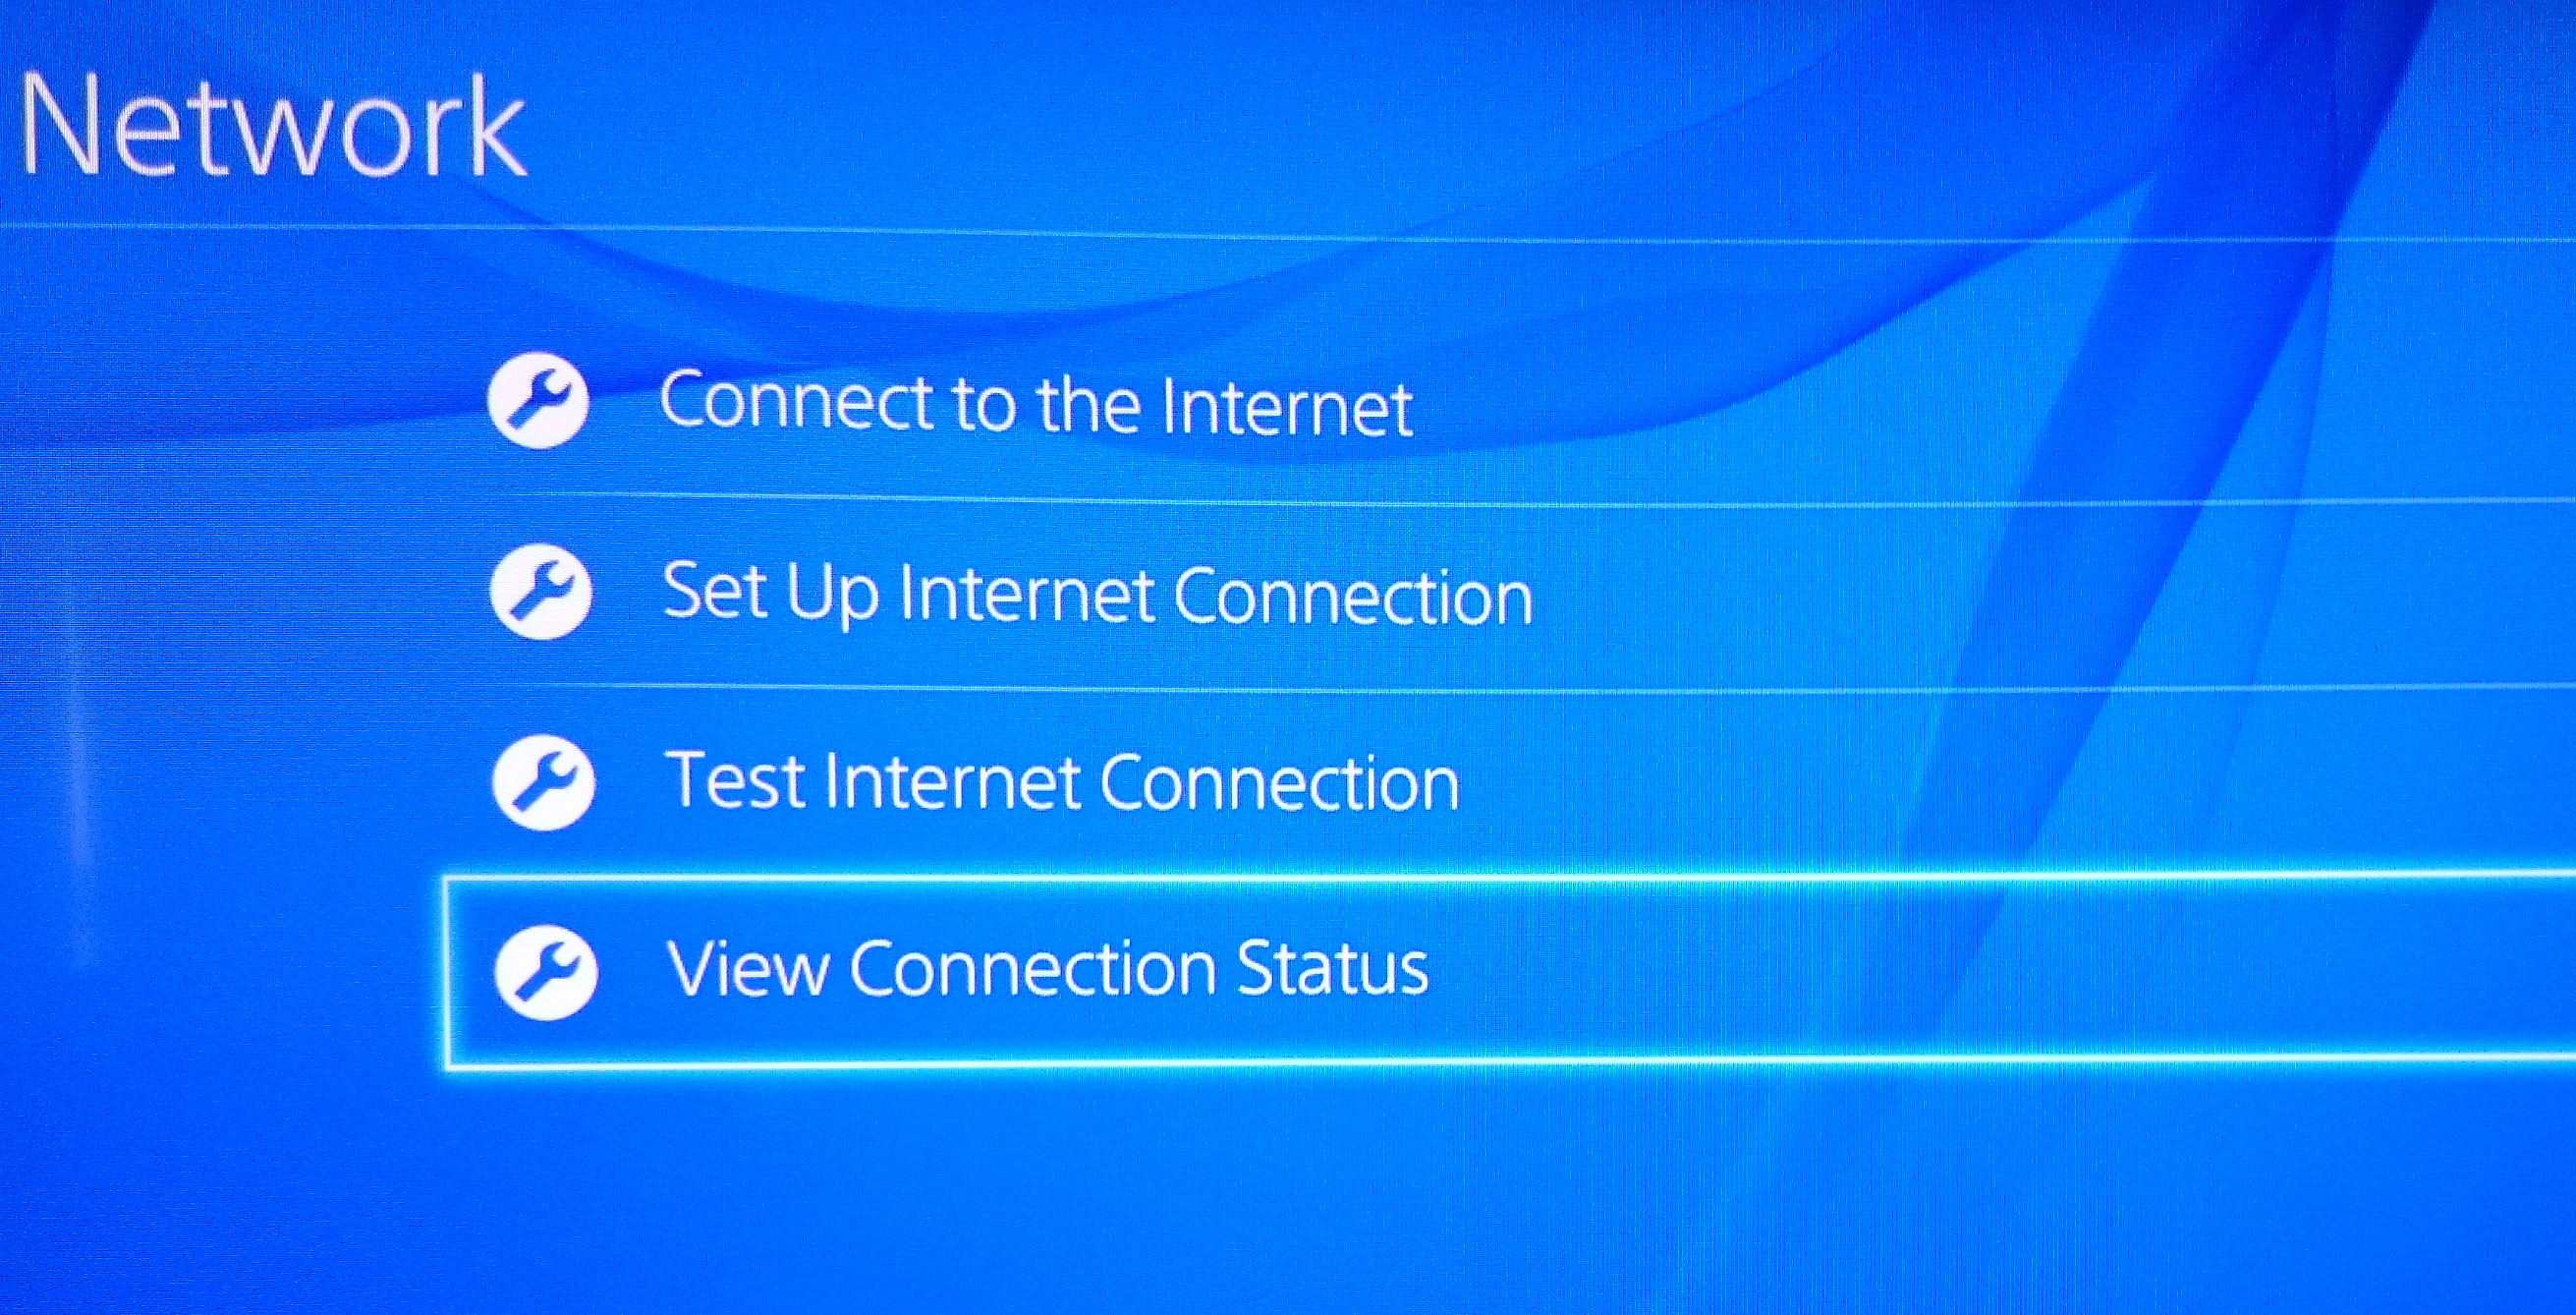 PS4: How to find MAC Address of WiFi or